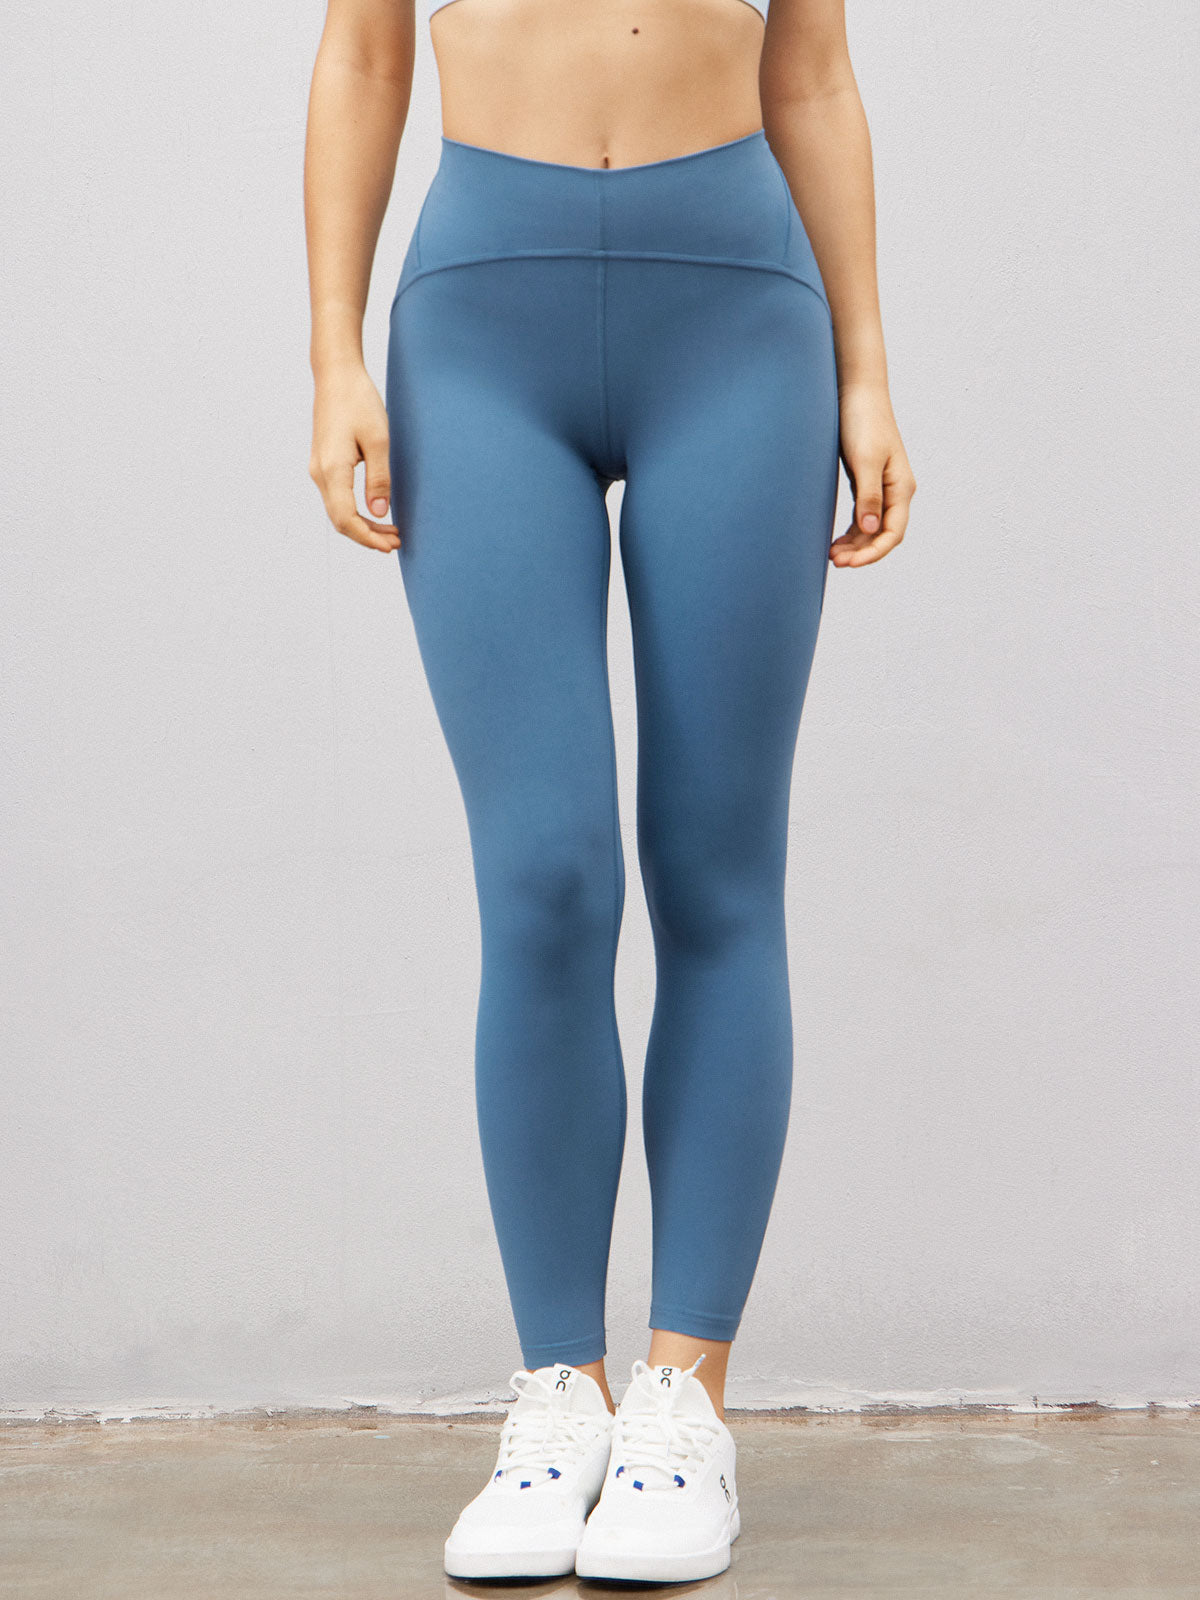 Blue Middle Waisted Leggings 25” & Reviews - Blue - Sustainable